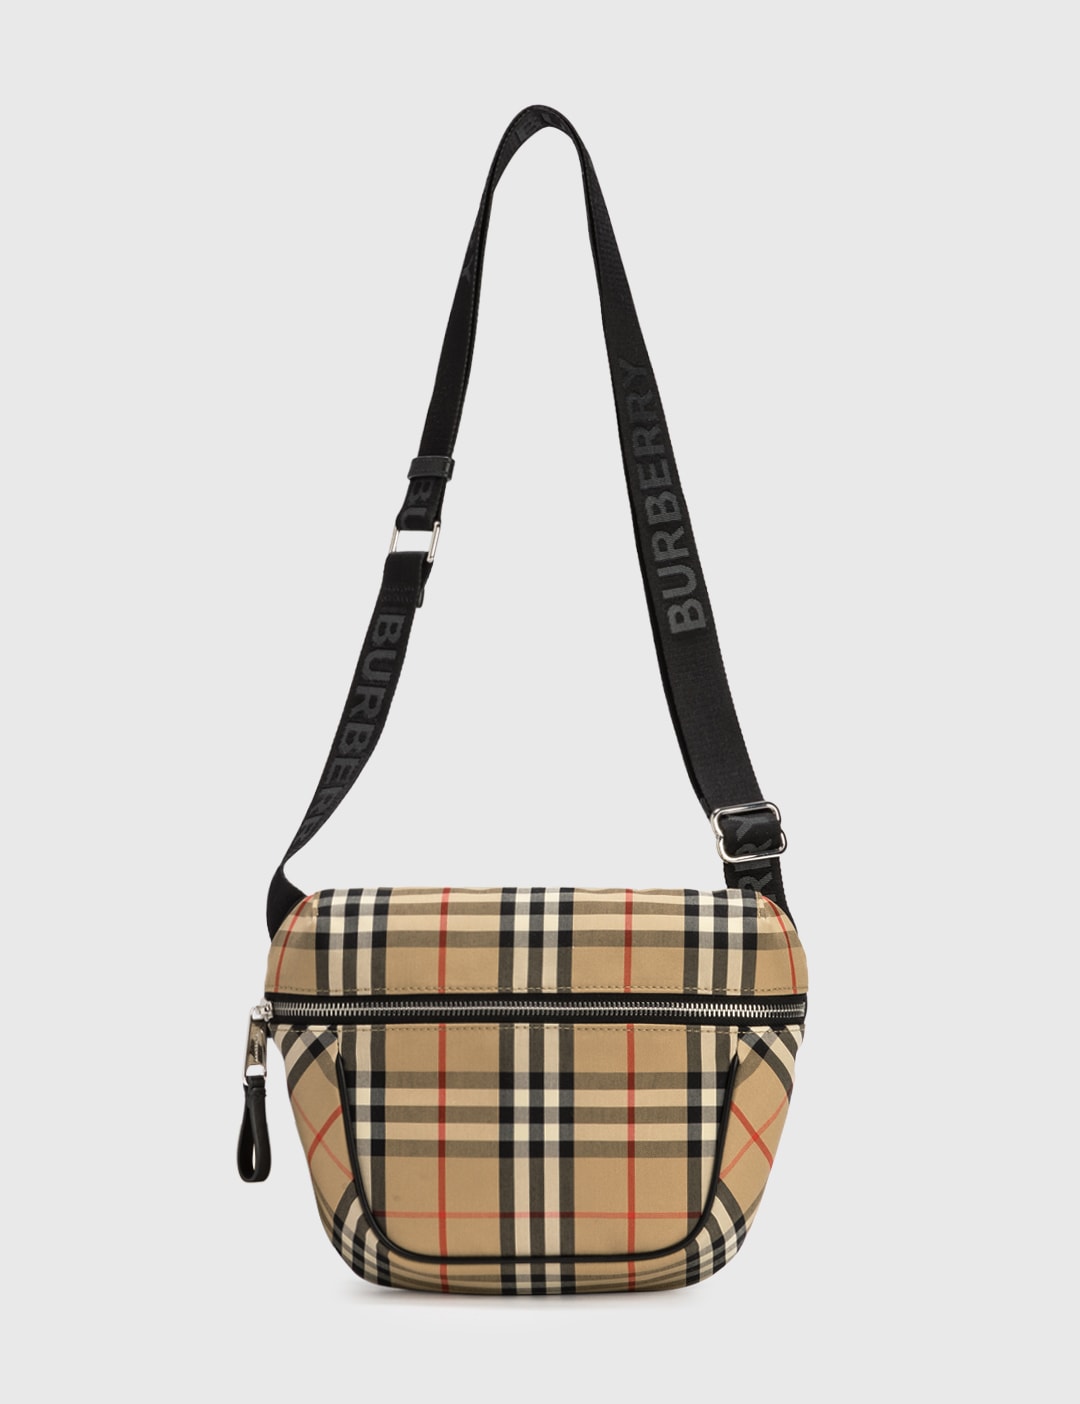 Burberry Plaid Top Handle Bag in White